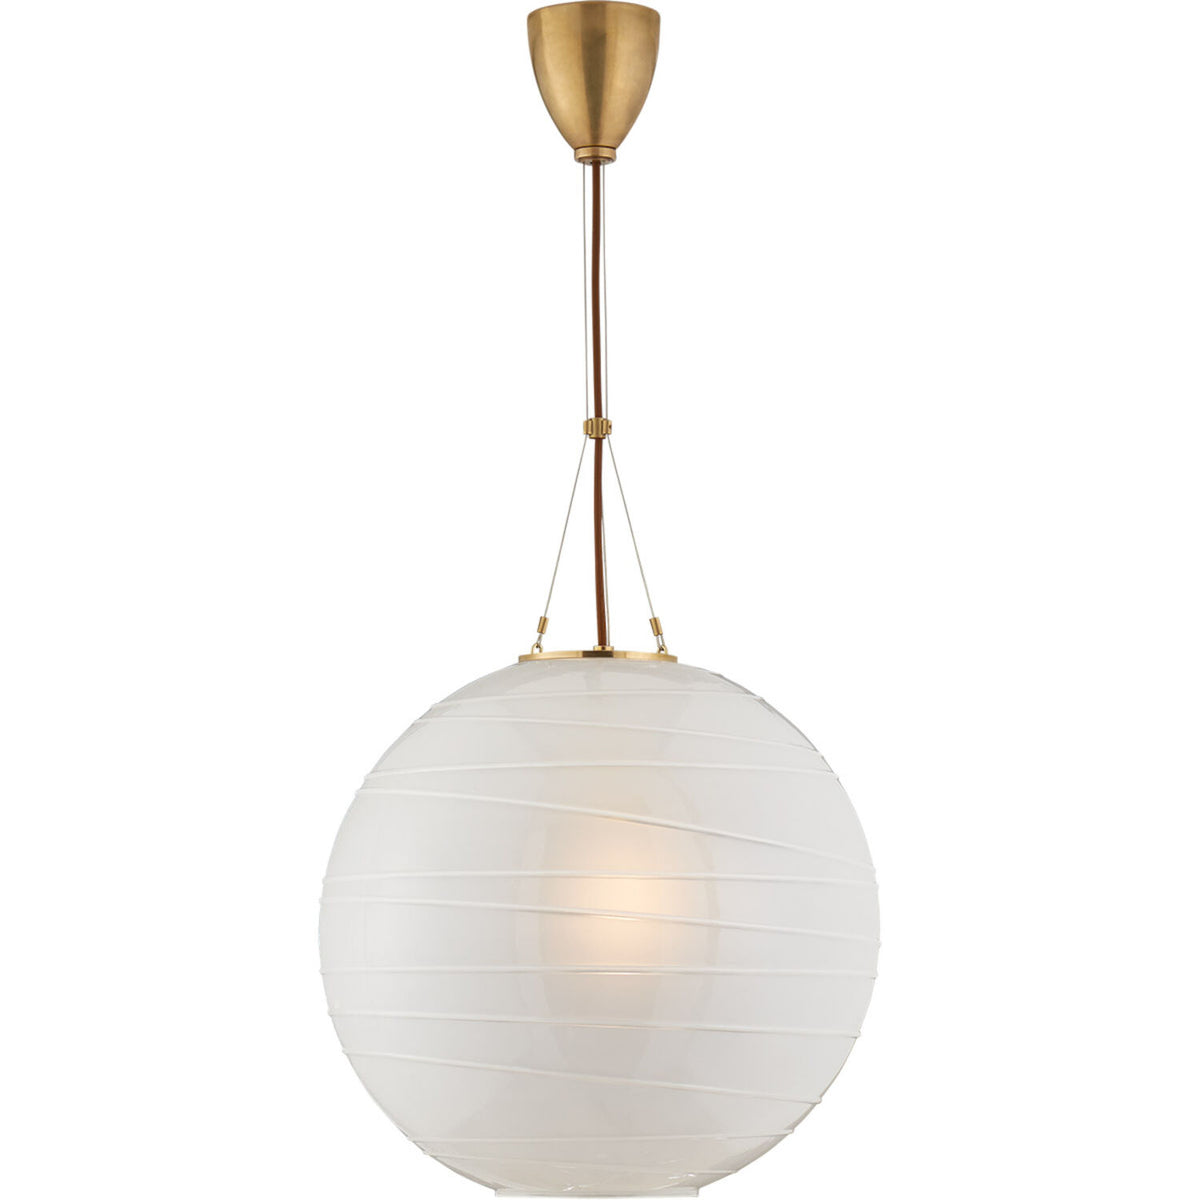 ALEXA HAMPTON HAILEY 1-LIGHT 18-INCH PENDANT LIGHT WITH FROSTED GLASS SHADE